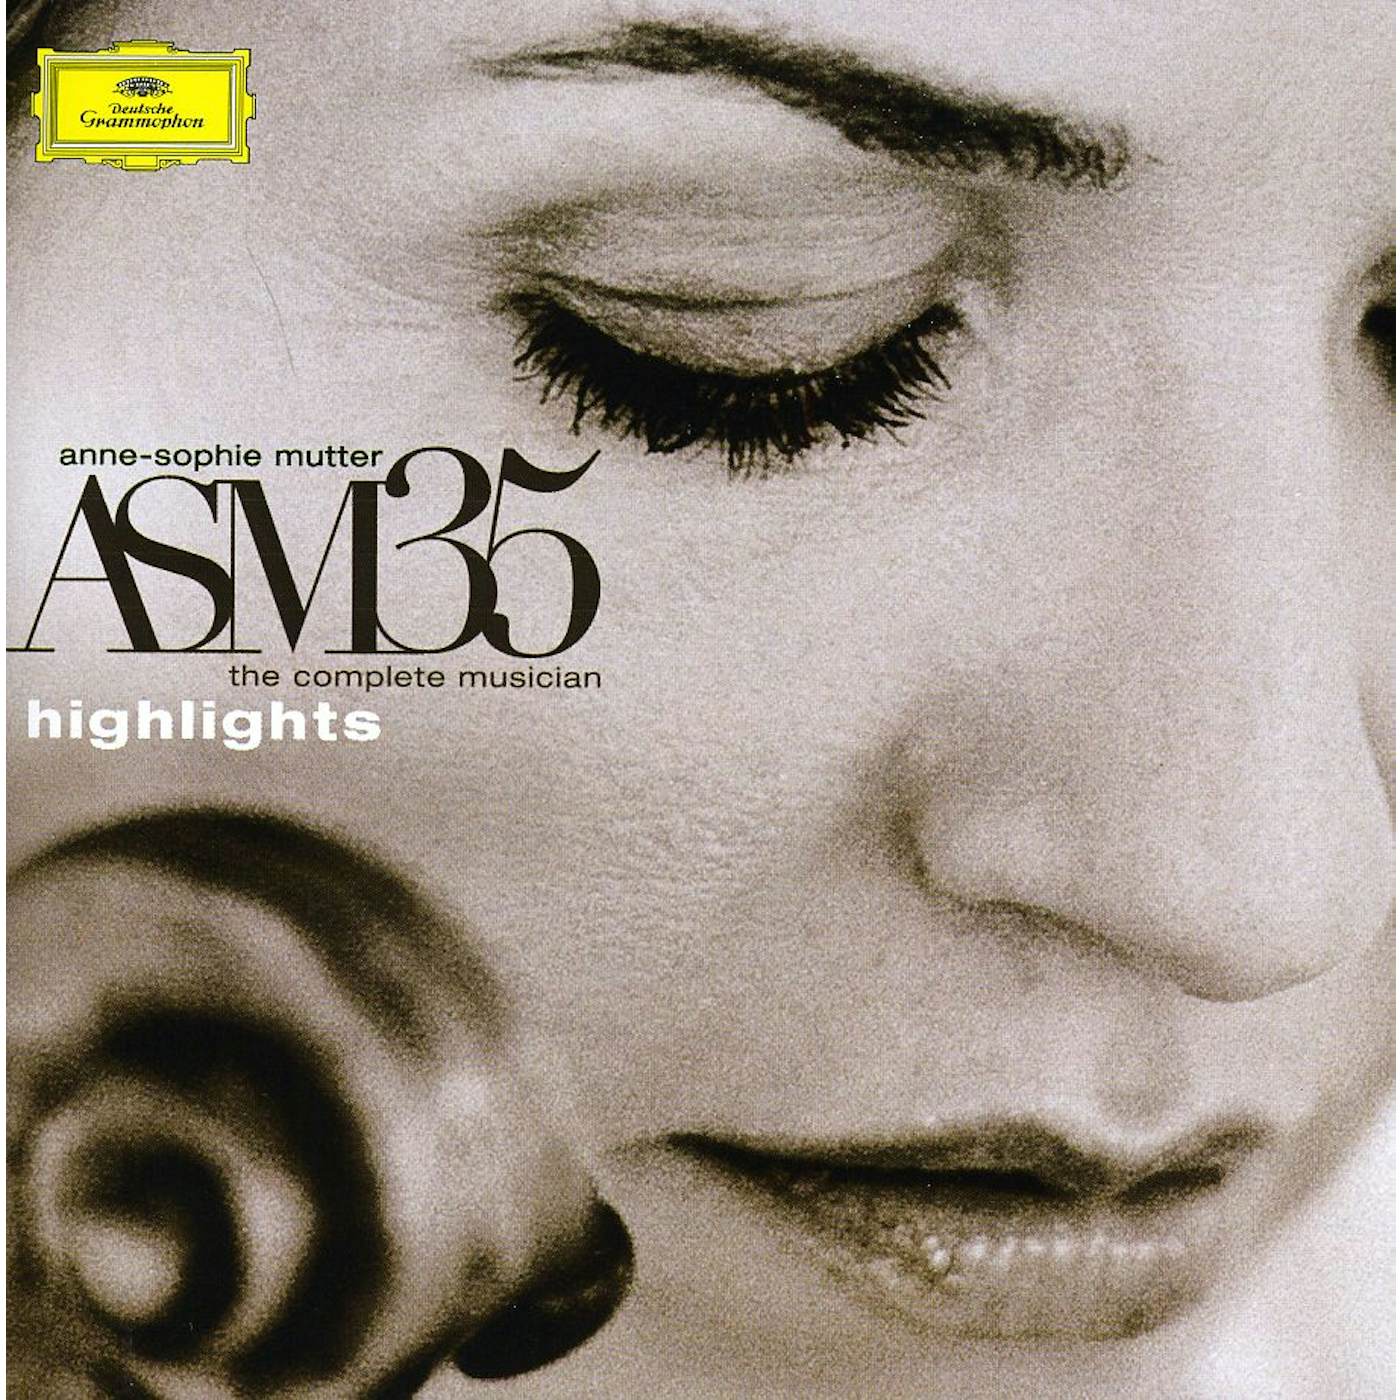 Anne-Sophie Mutter ASM 35: THE COMPLETE MUSICIAN - HIGHLIGHTS CD